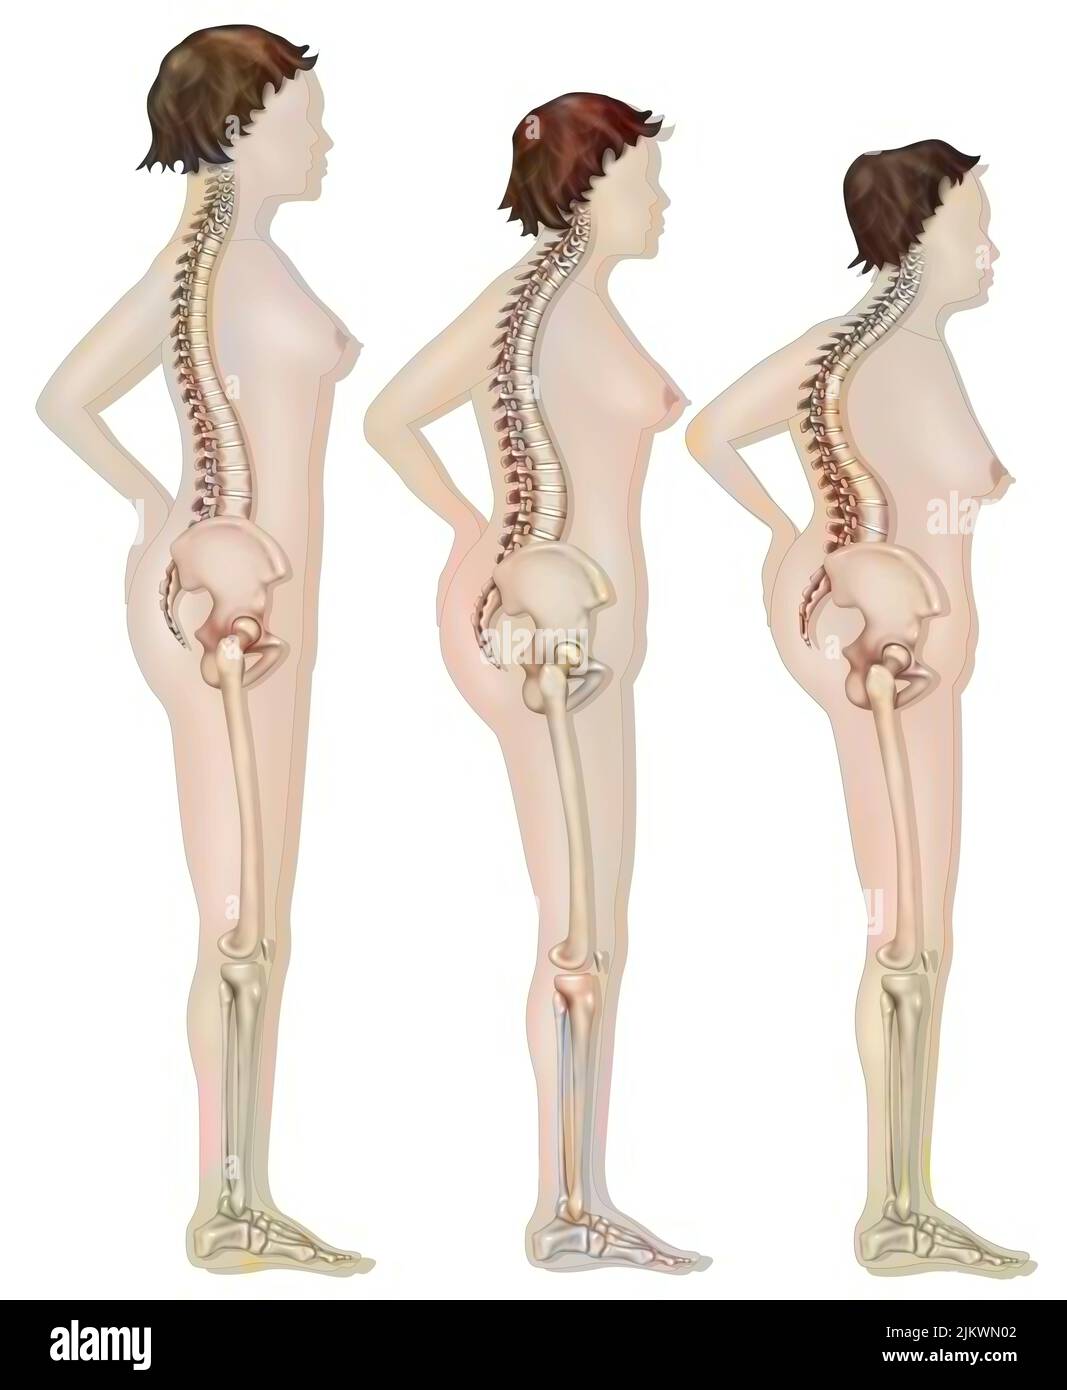 Modification of the silhouette linked to osteoporosis (vertebral compression). Stock Photo